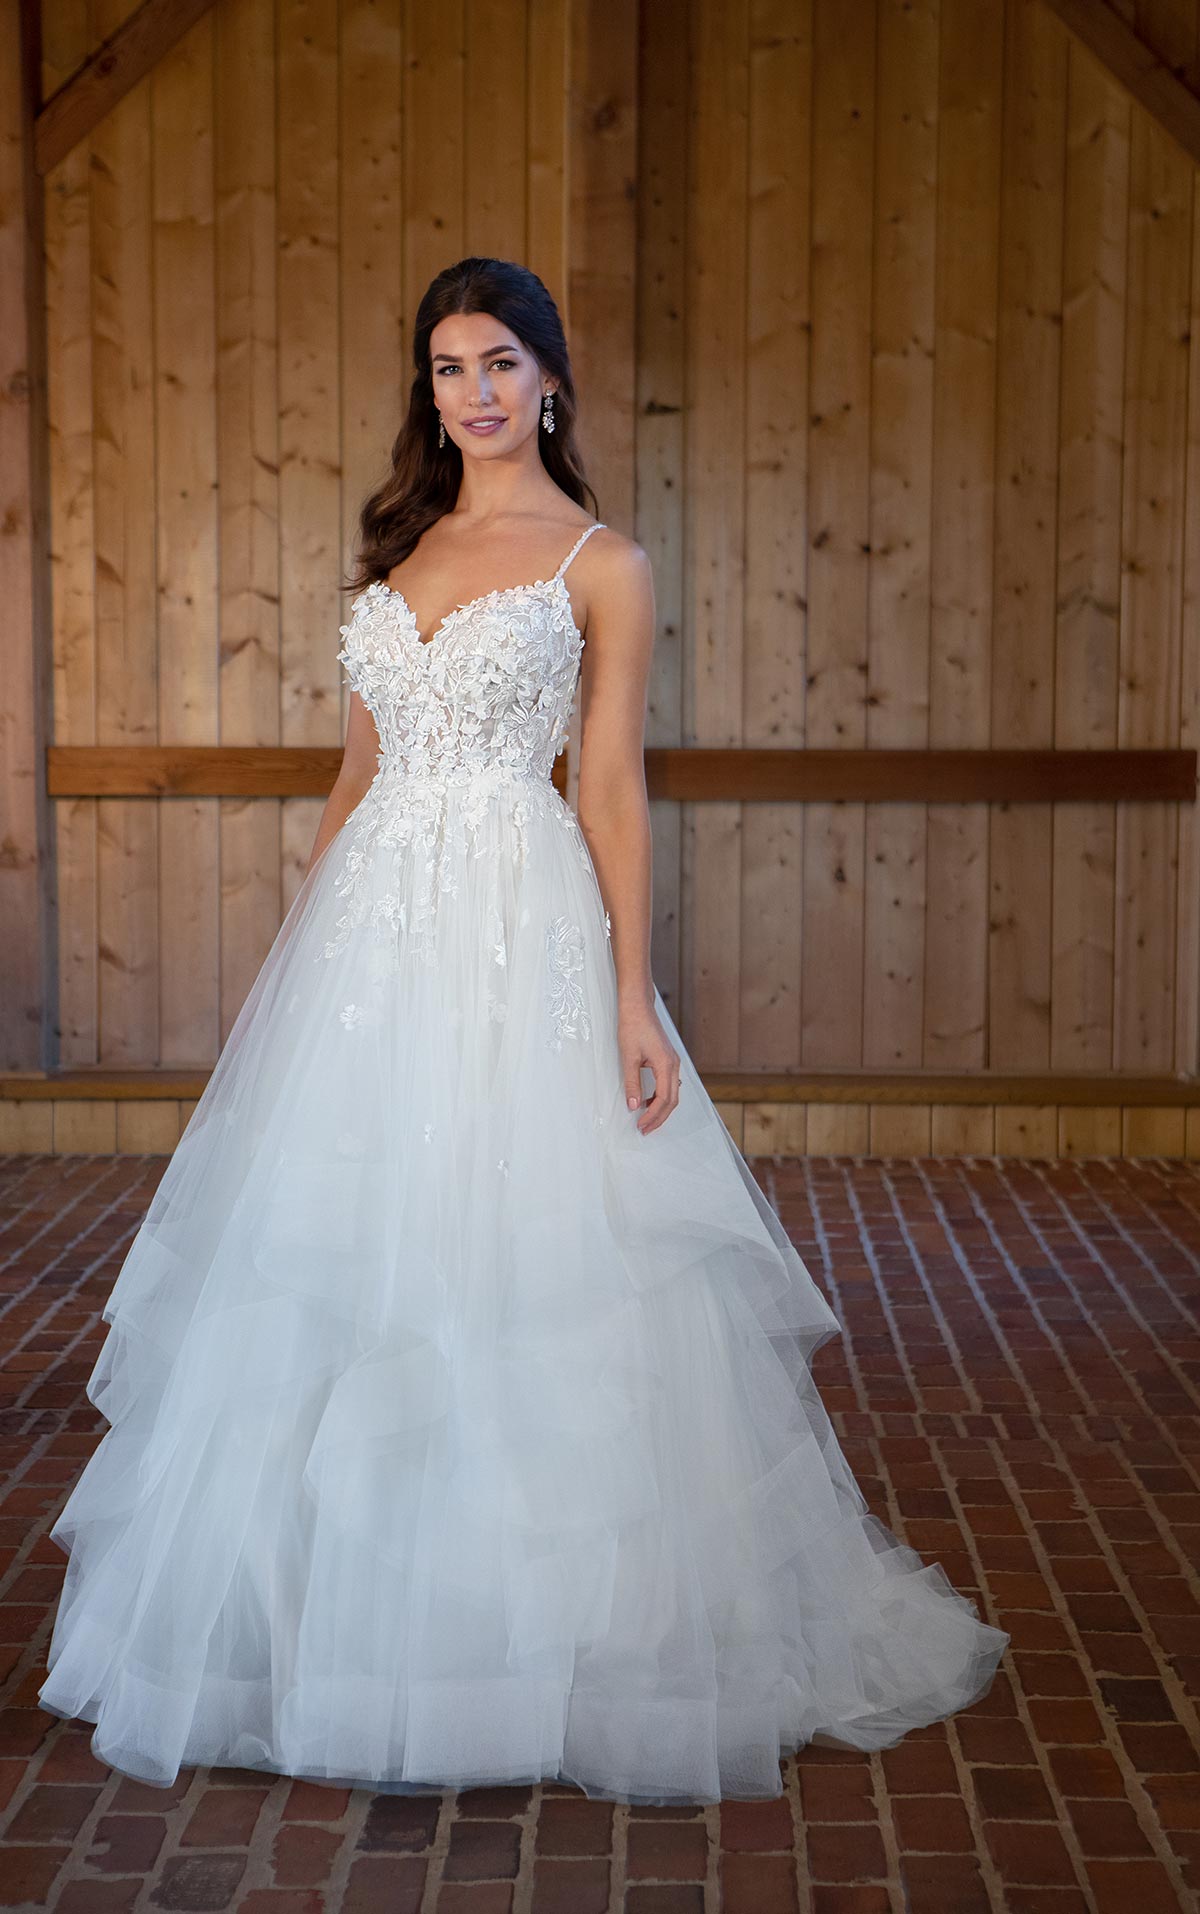 Tulle Ball Gown Wedding Dress With Sweetheart Neckline And